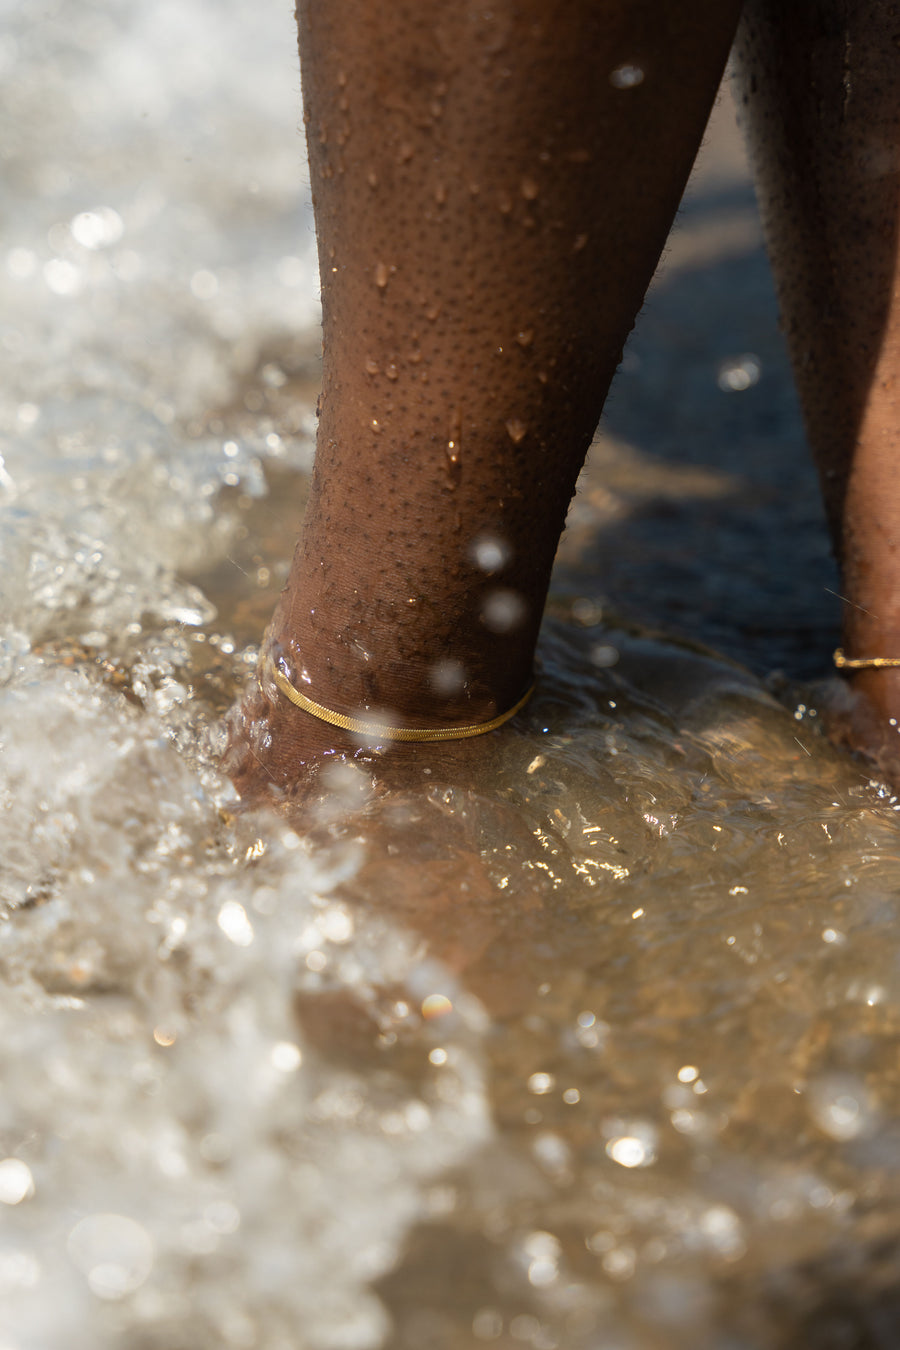 Legs with 18k gold stainless steel anklets worn on them and submerged under water.